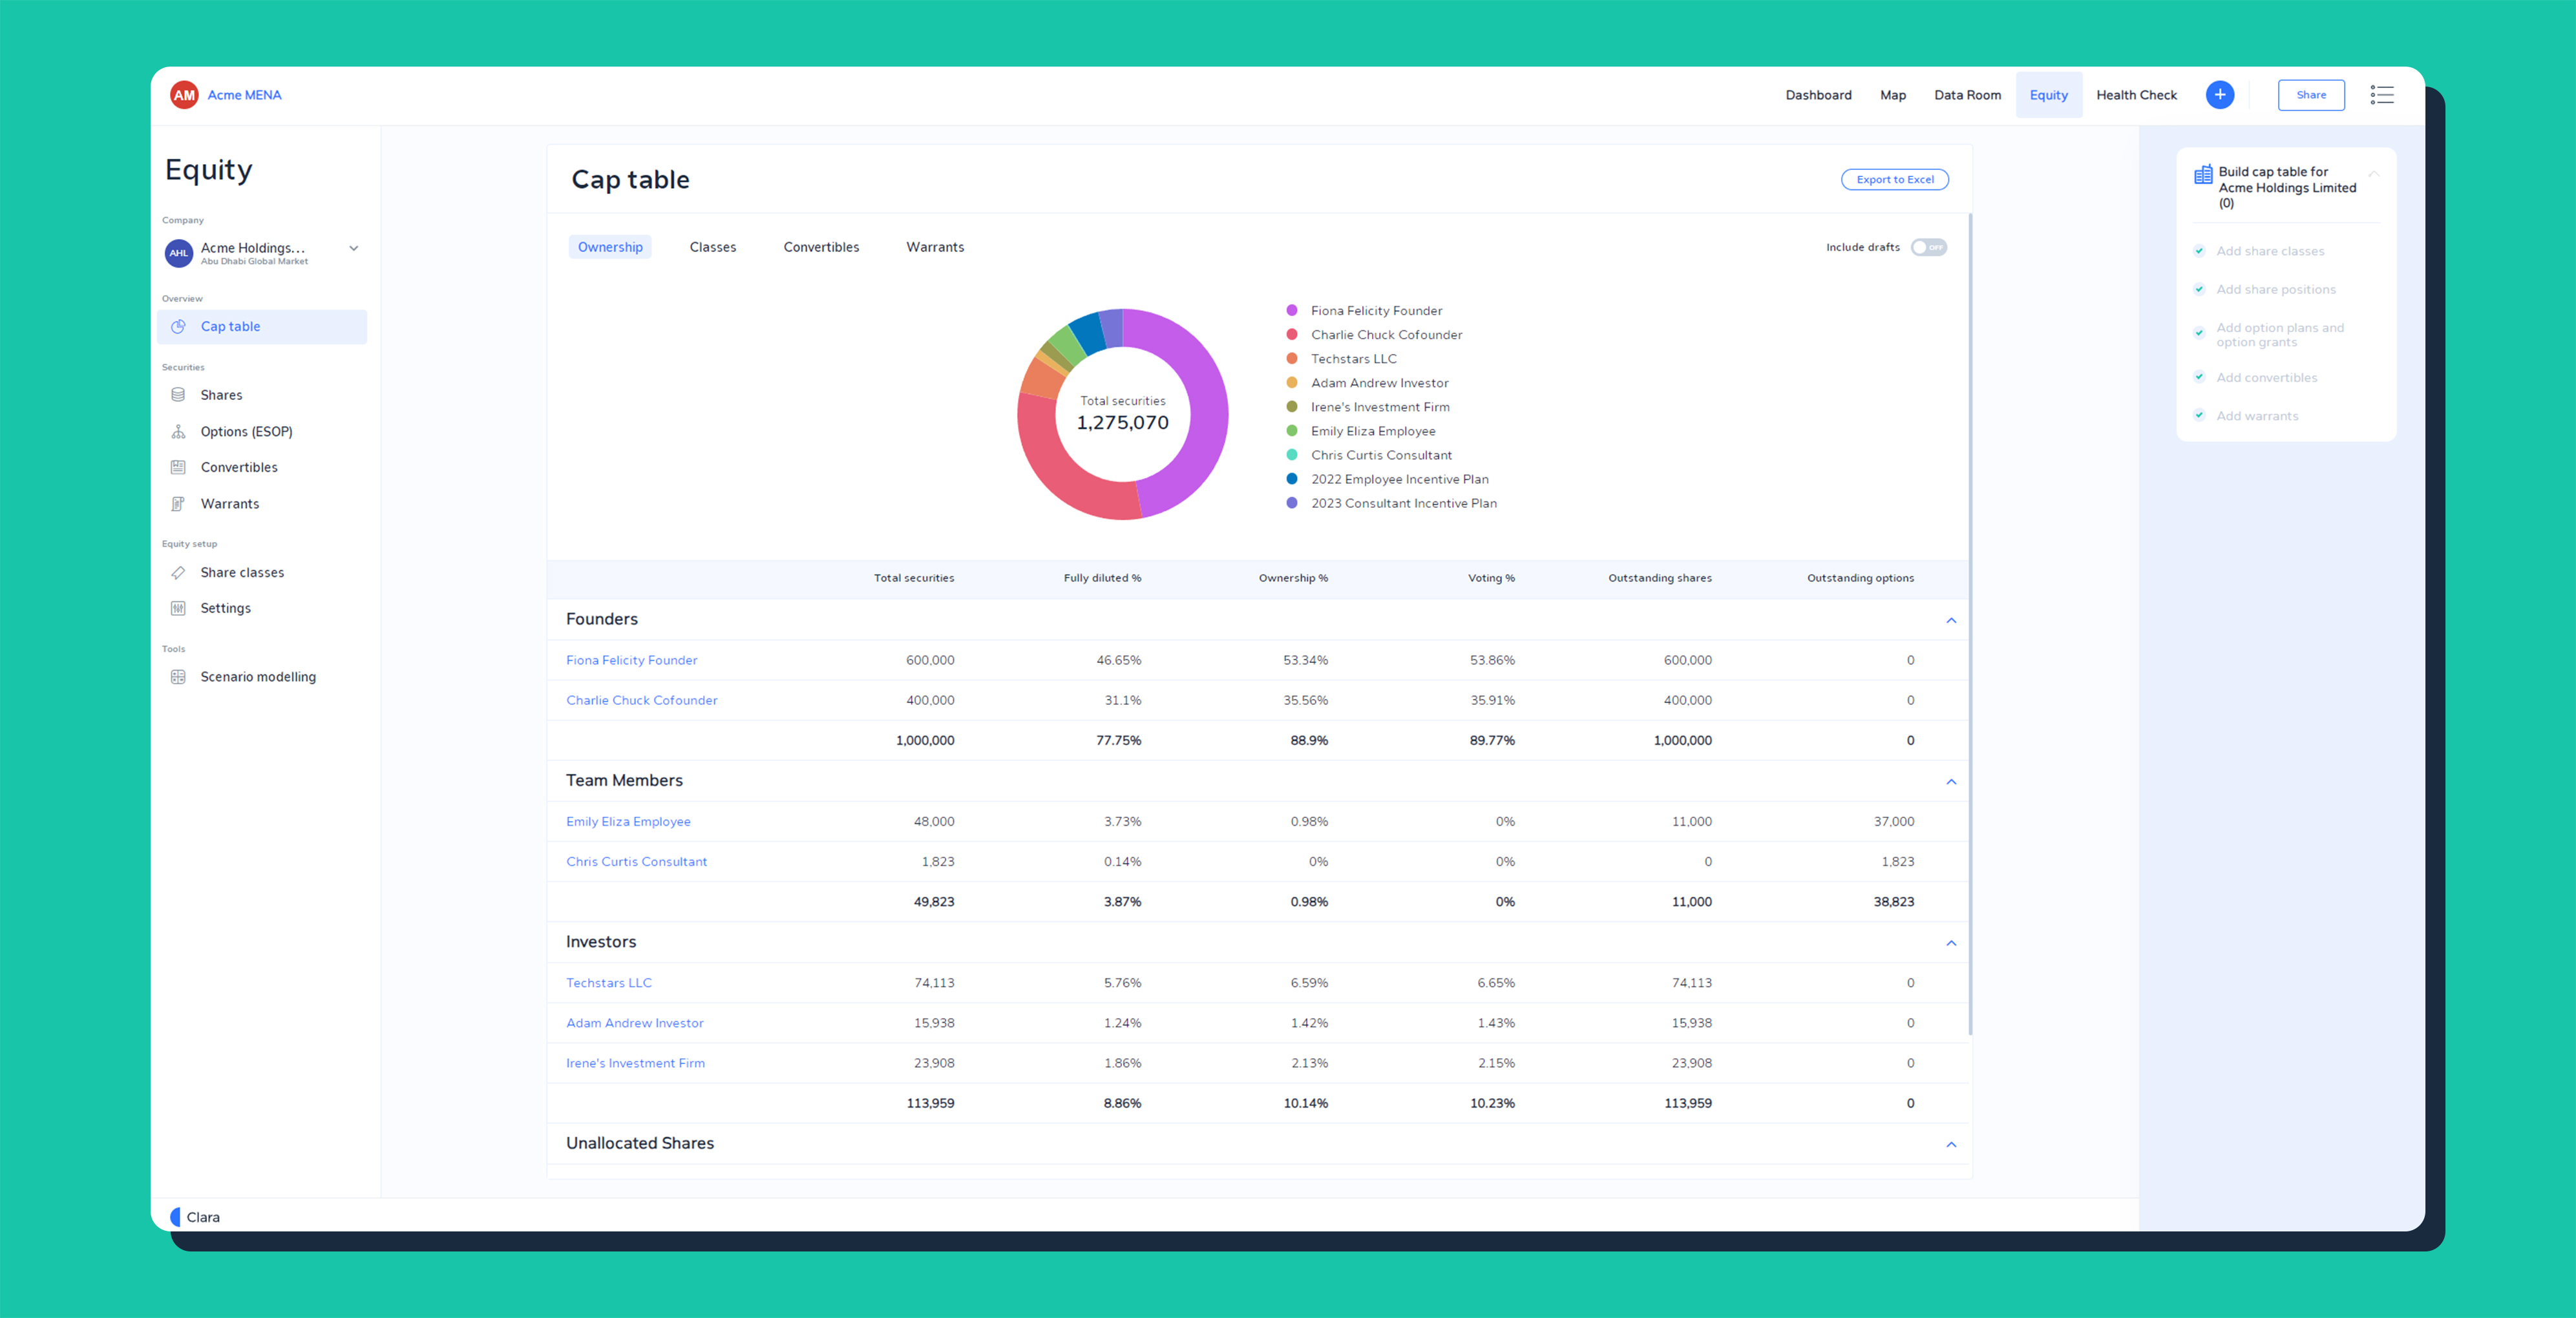 Clara, the legal operating system that provides digital tools to help founders, investors and lawyers form, manage and scale startups, has launched a new cap table feature as shown above. 